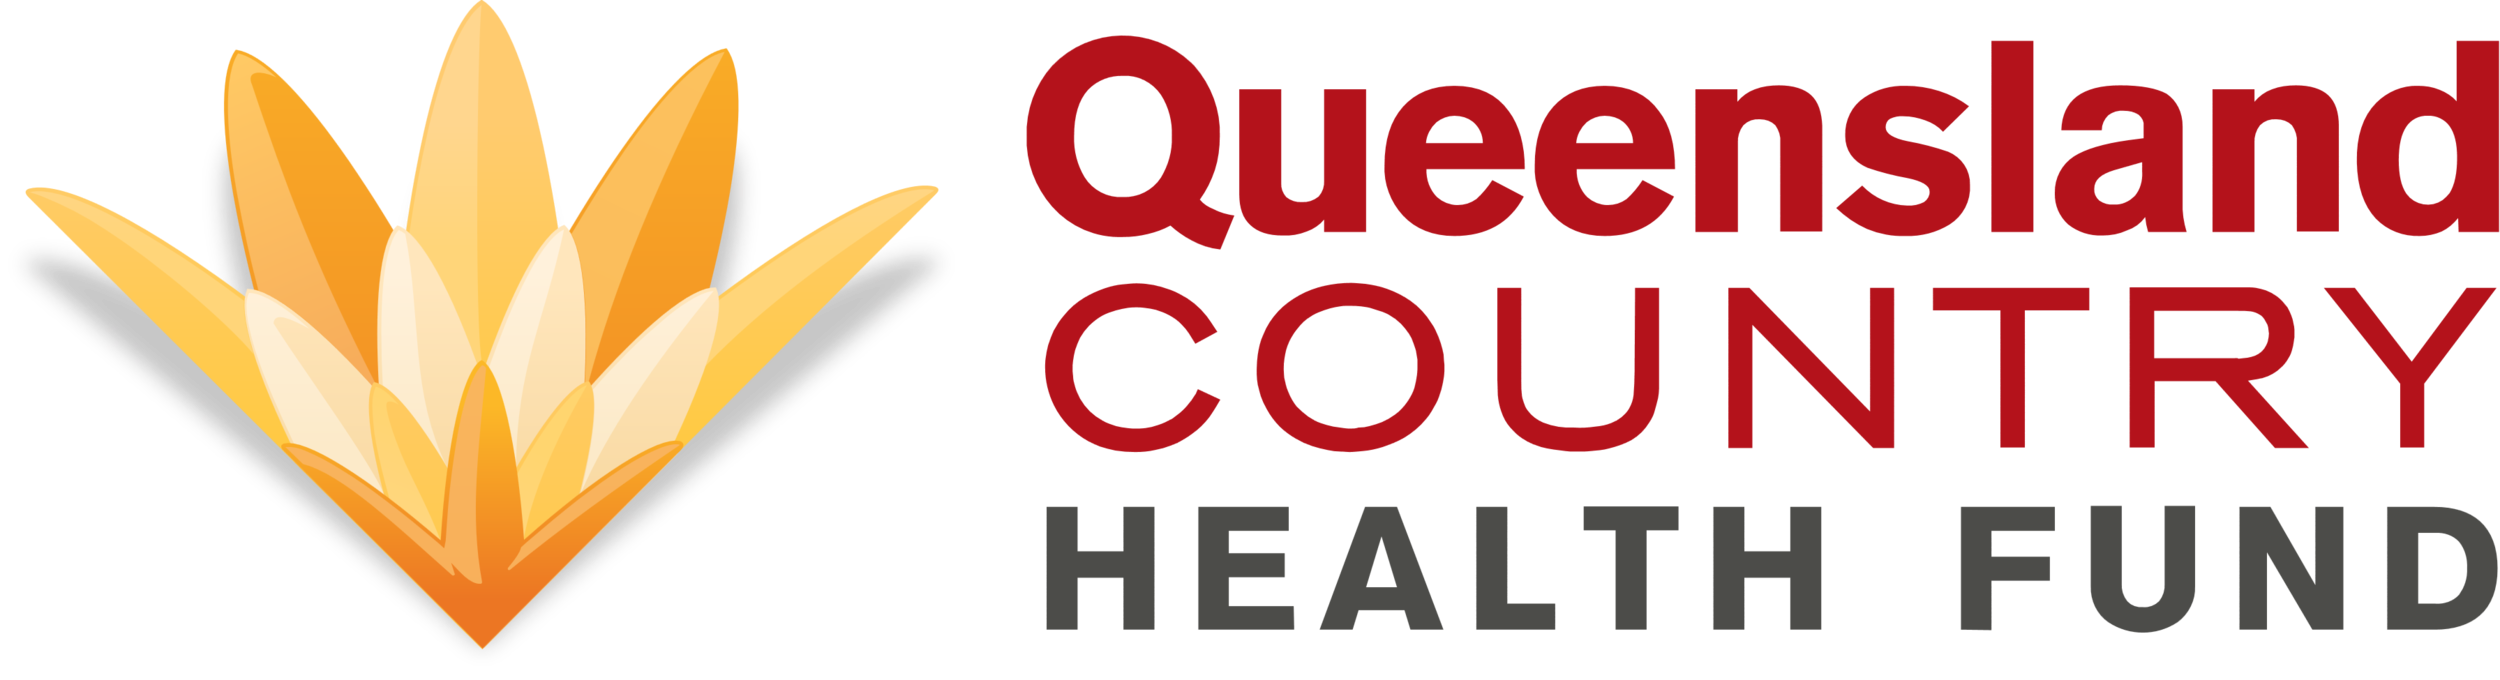 Queensland_Country_Health_Fund_logos.png